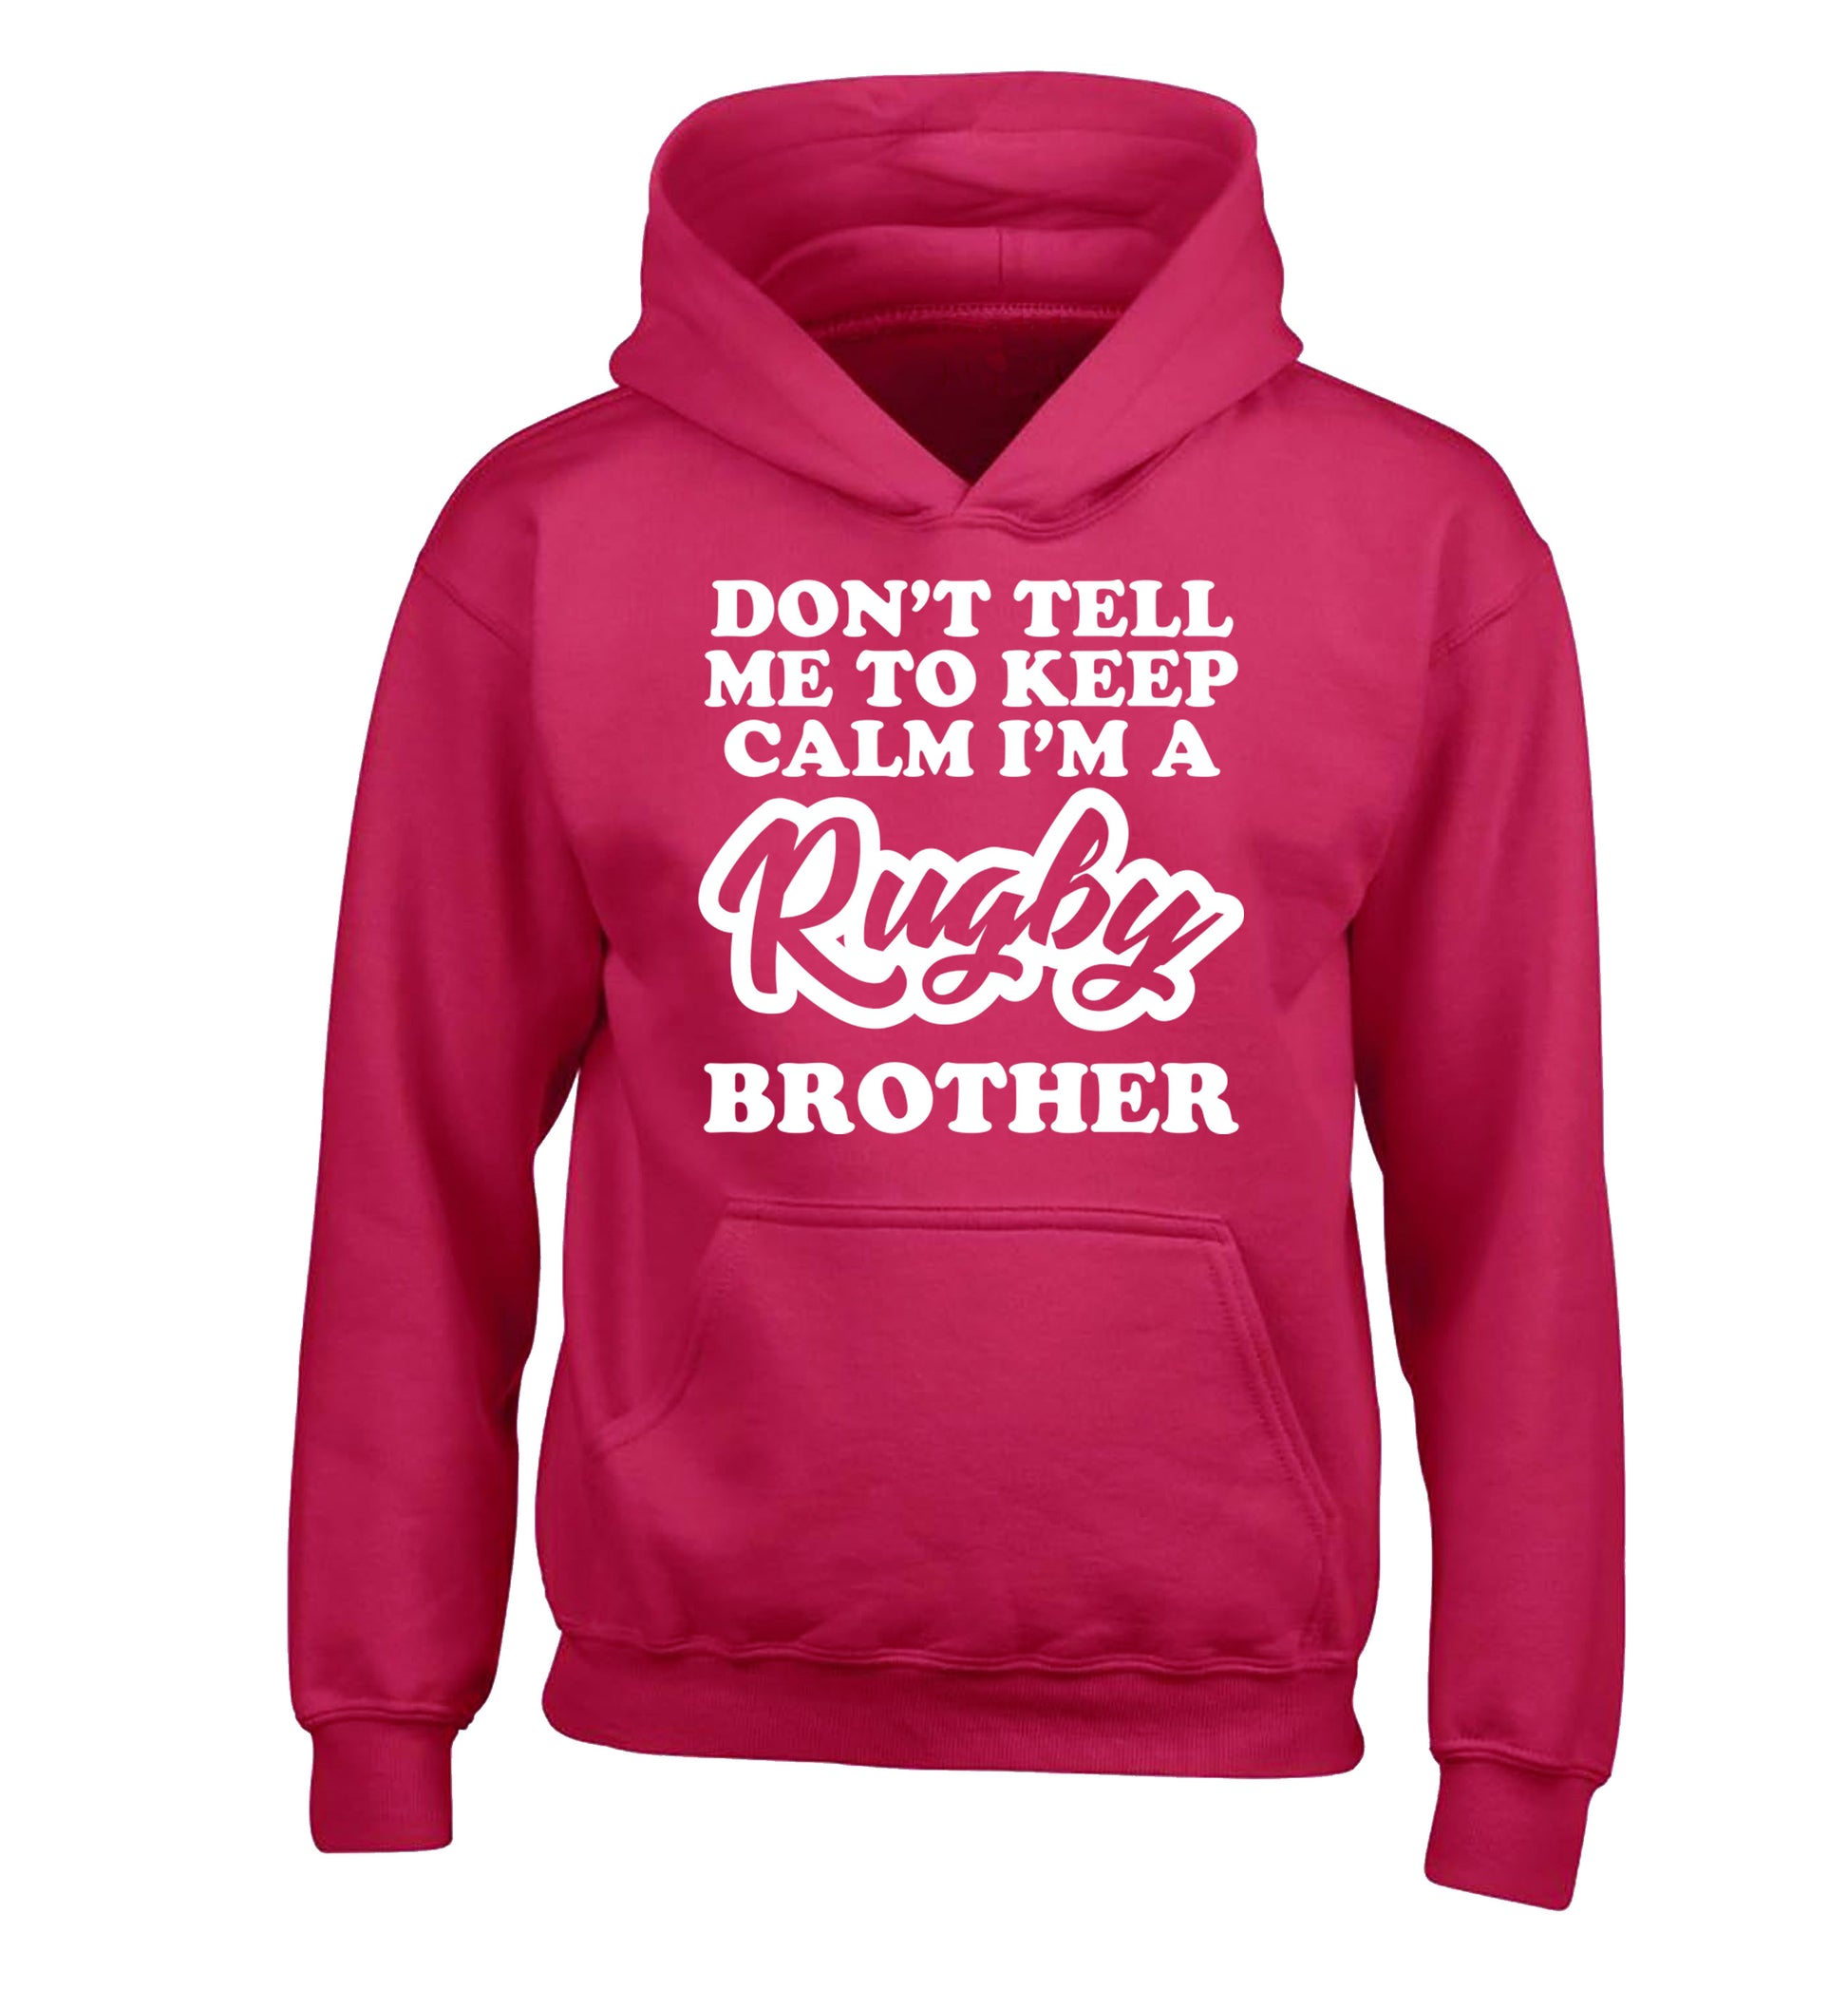 Don't tell me keep calm I'm a rugby brother children's pink hoodie 12-13 Years